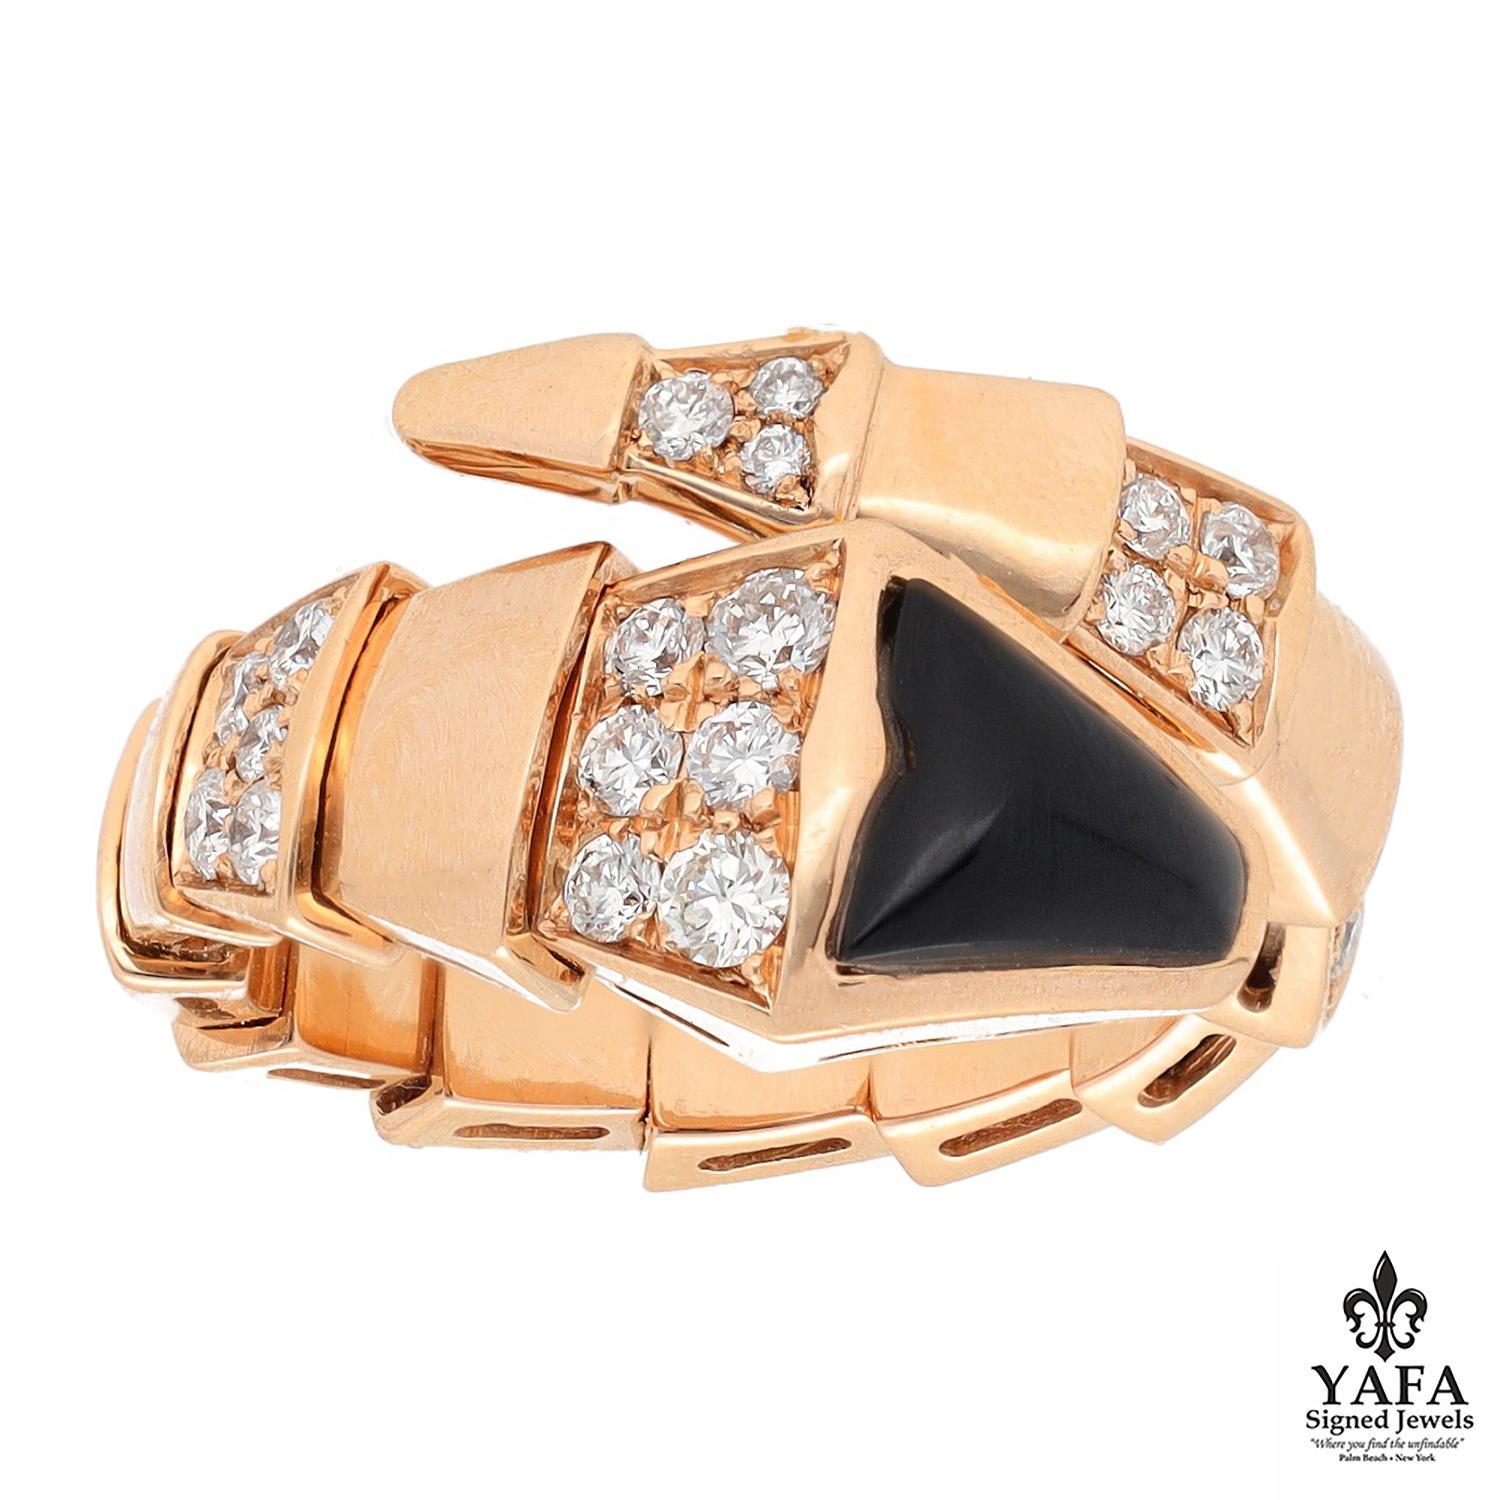 Serpenti Viper One-Coil 18K Rose Gold Ring Set with Pave Diamonds and a Black Onyx Element on the Head.

Size - 50 / 5.25
Size Stamp - S
Made in Italy

Signed - BVLGARI